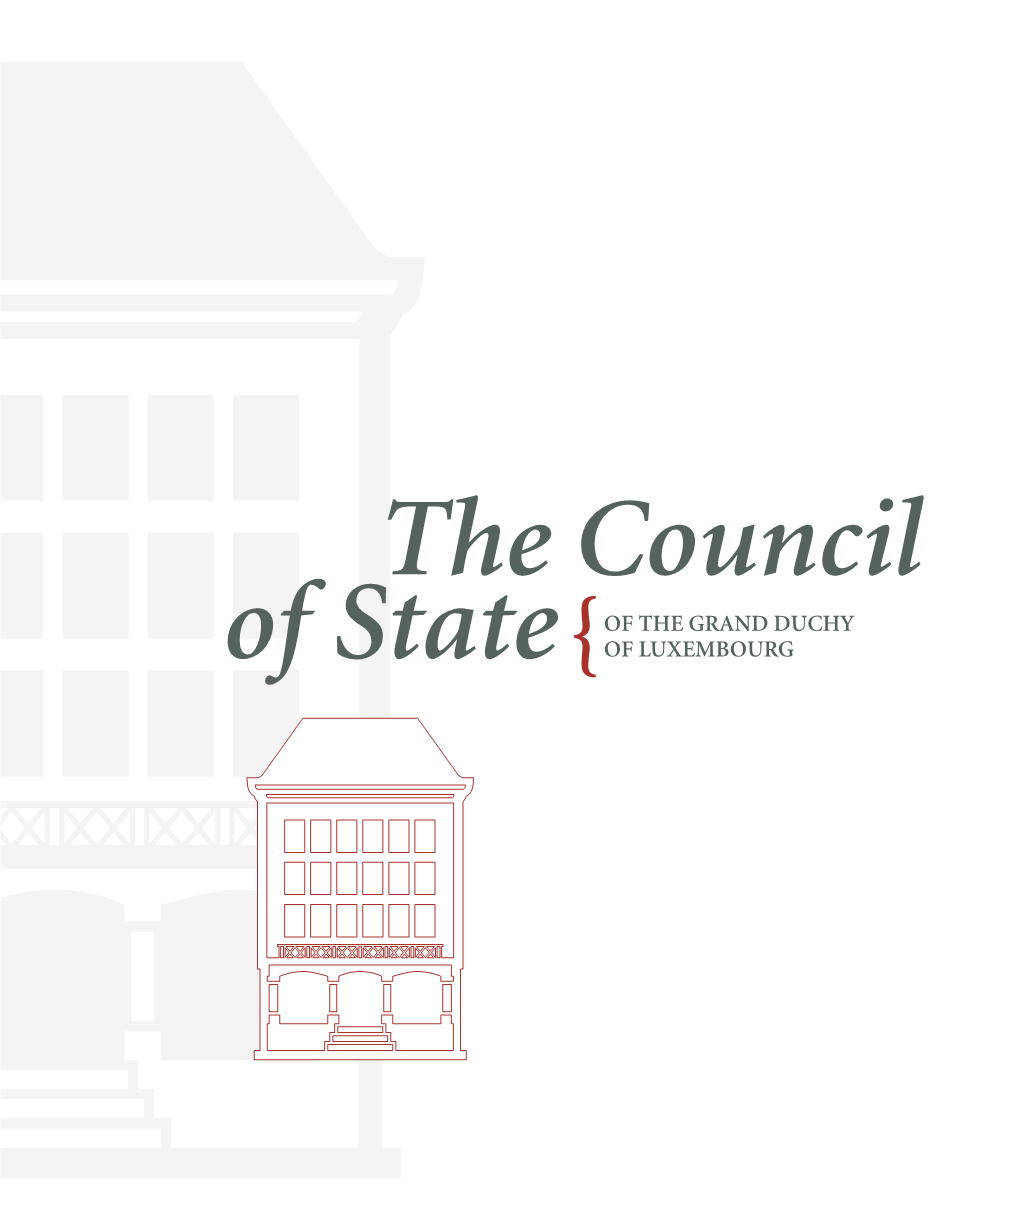 The Council of State of the Grand Duchy of Luxembourg